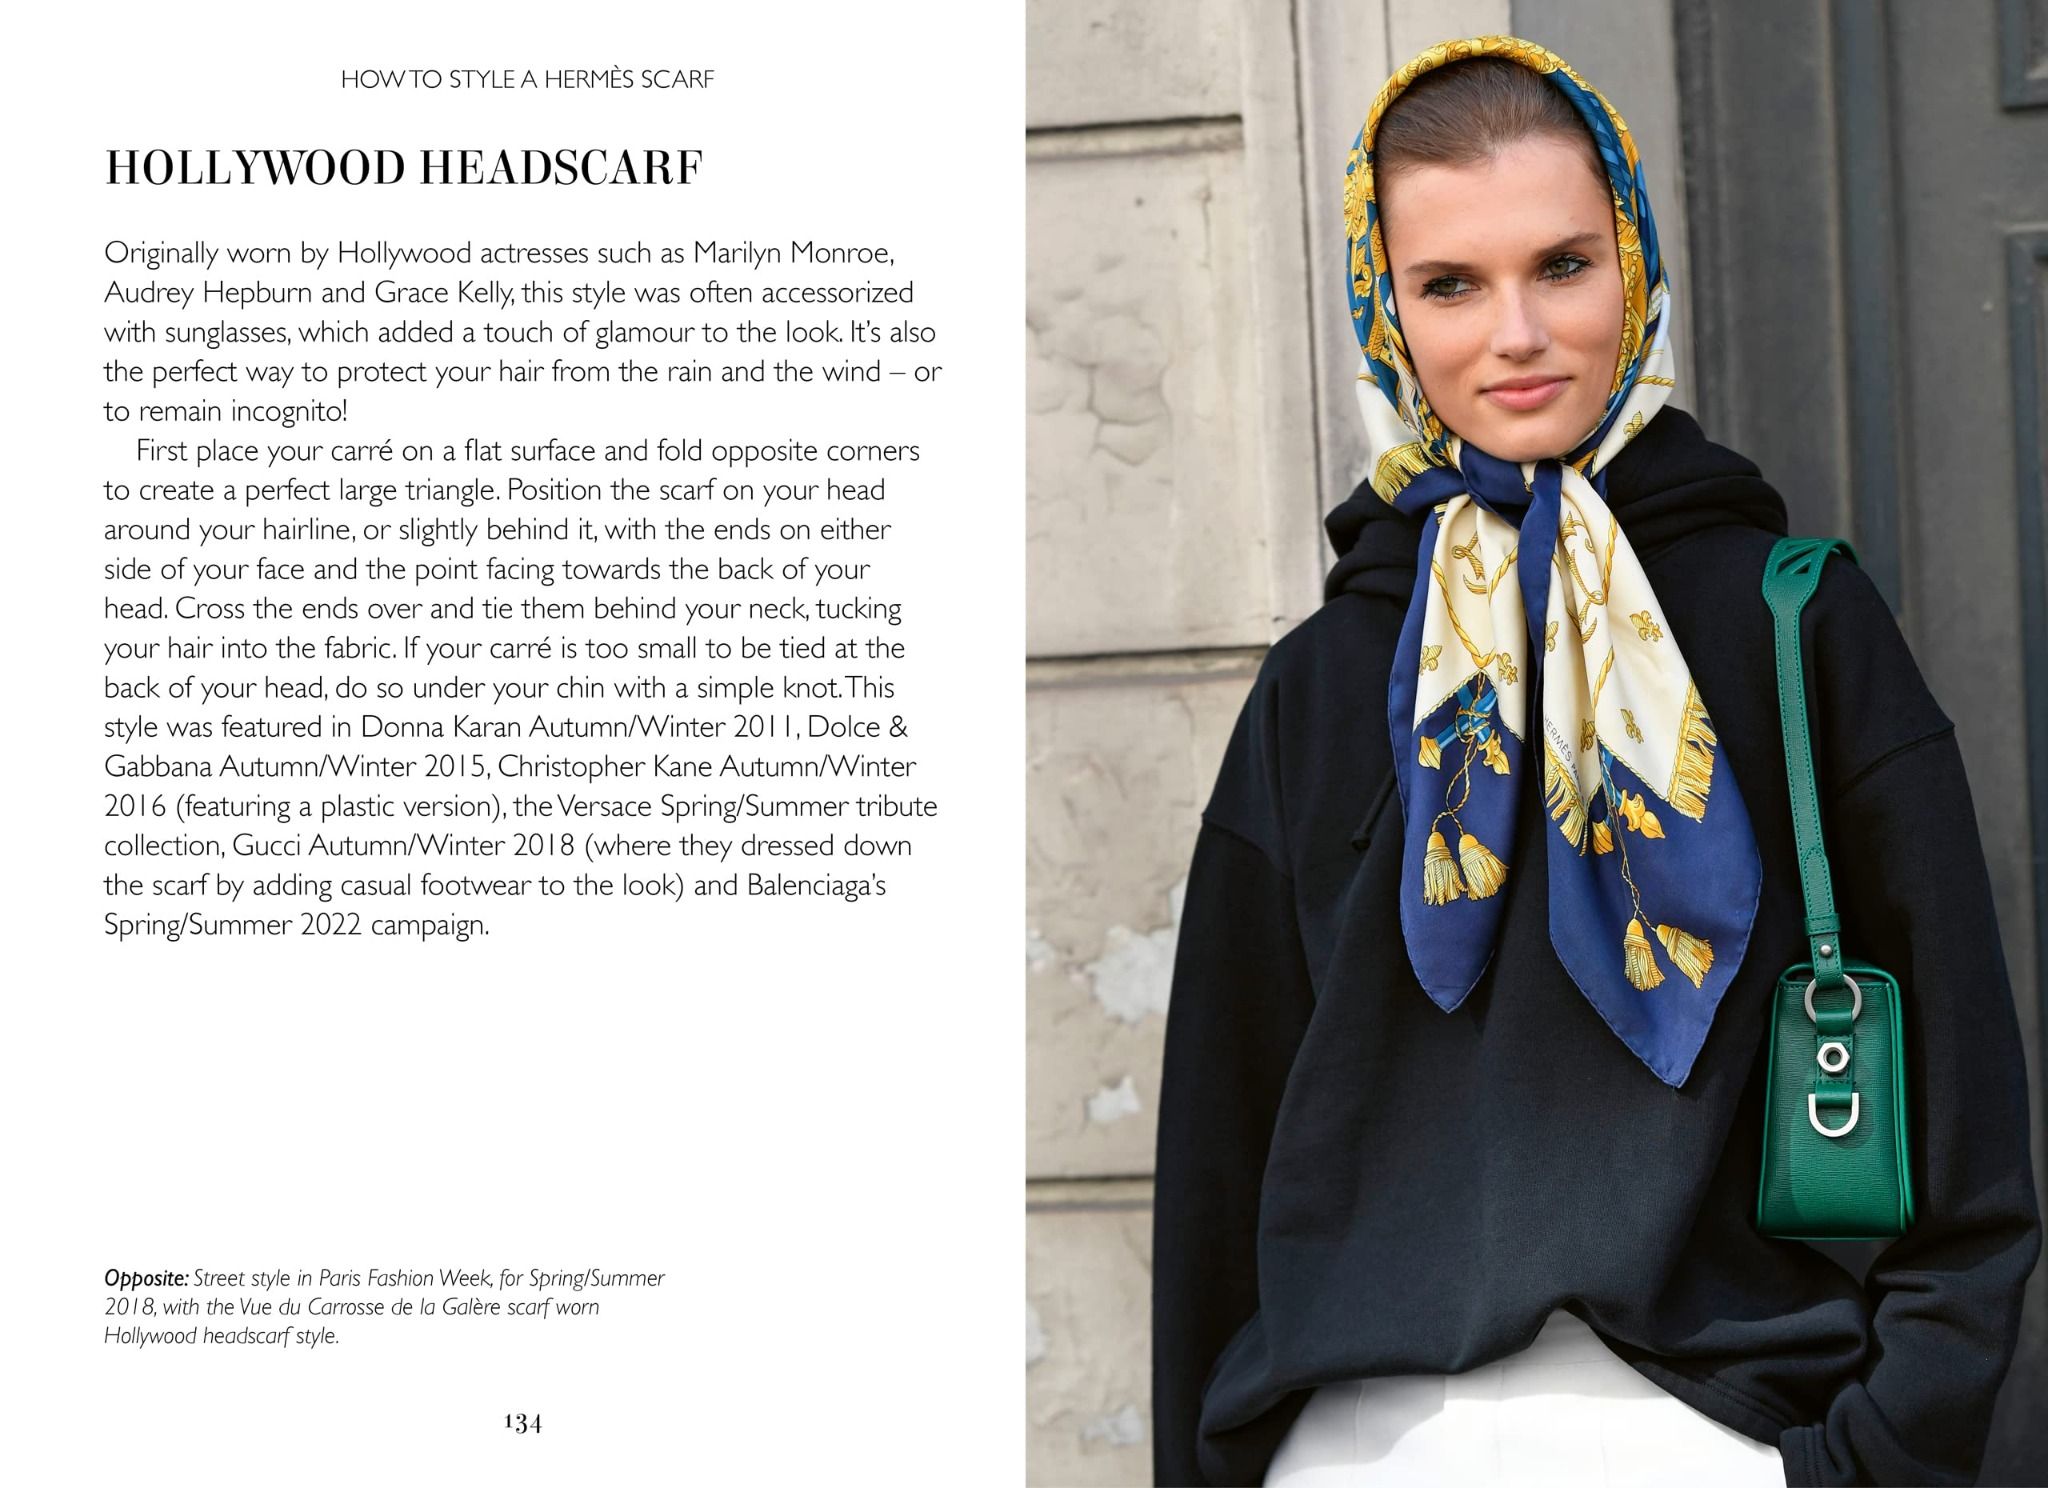  The Story of the Hermès Scarf 